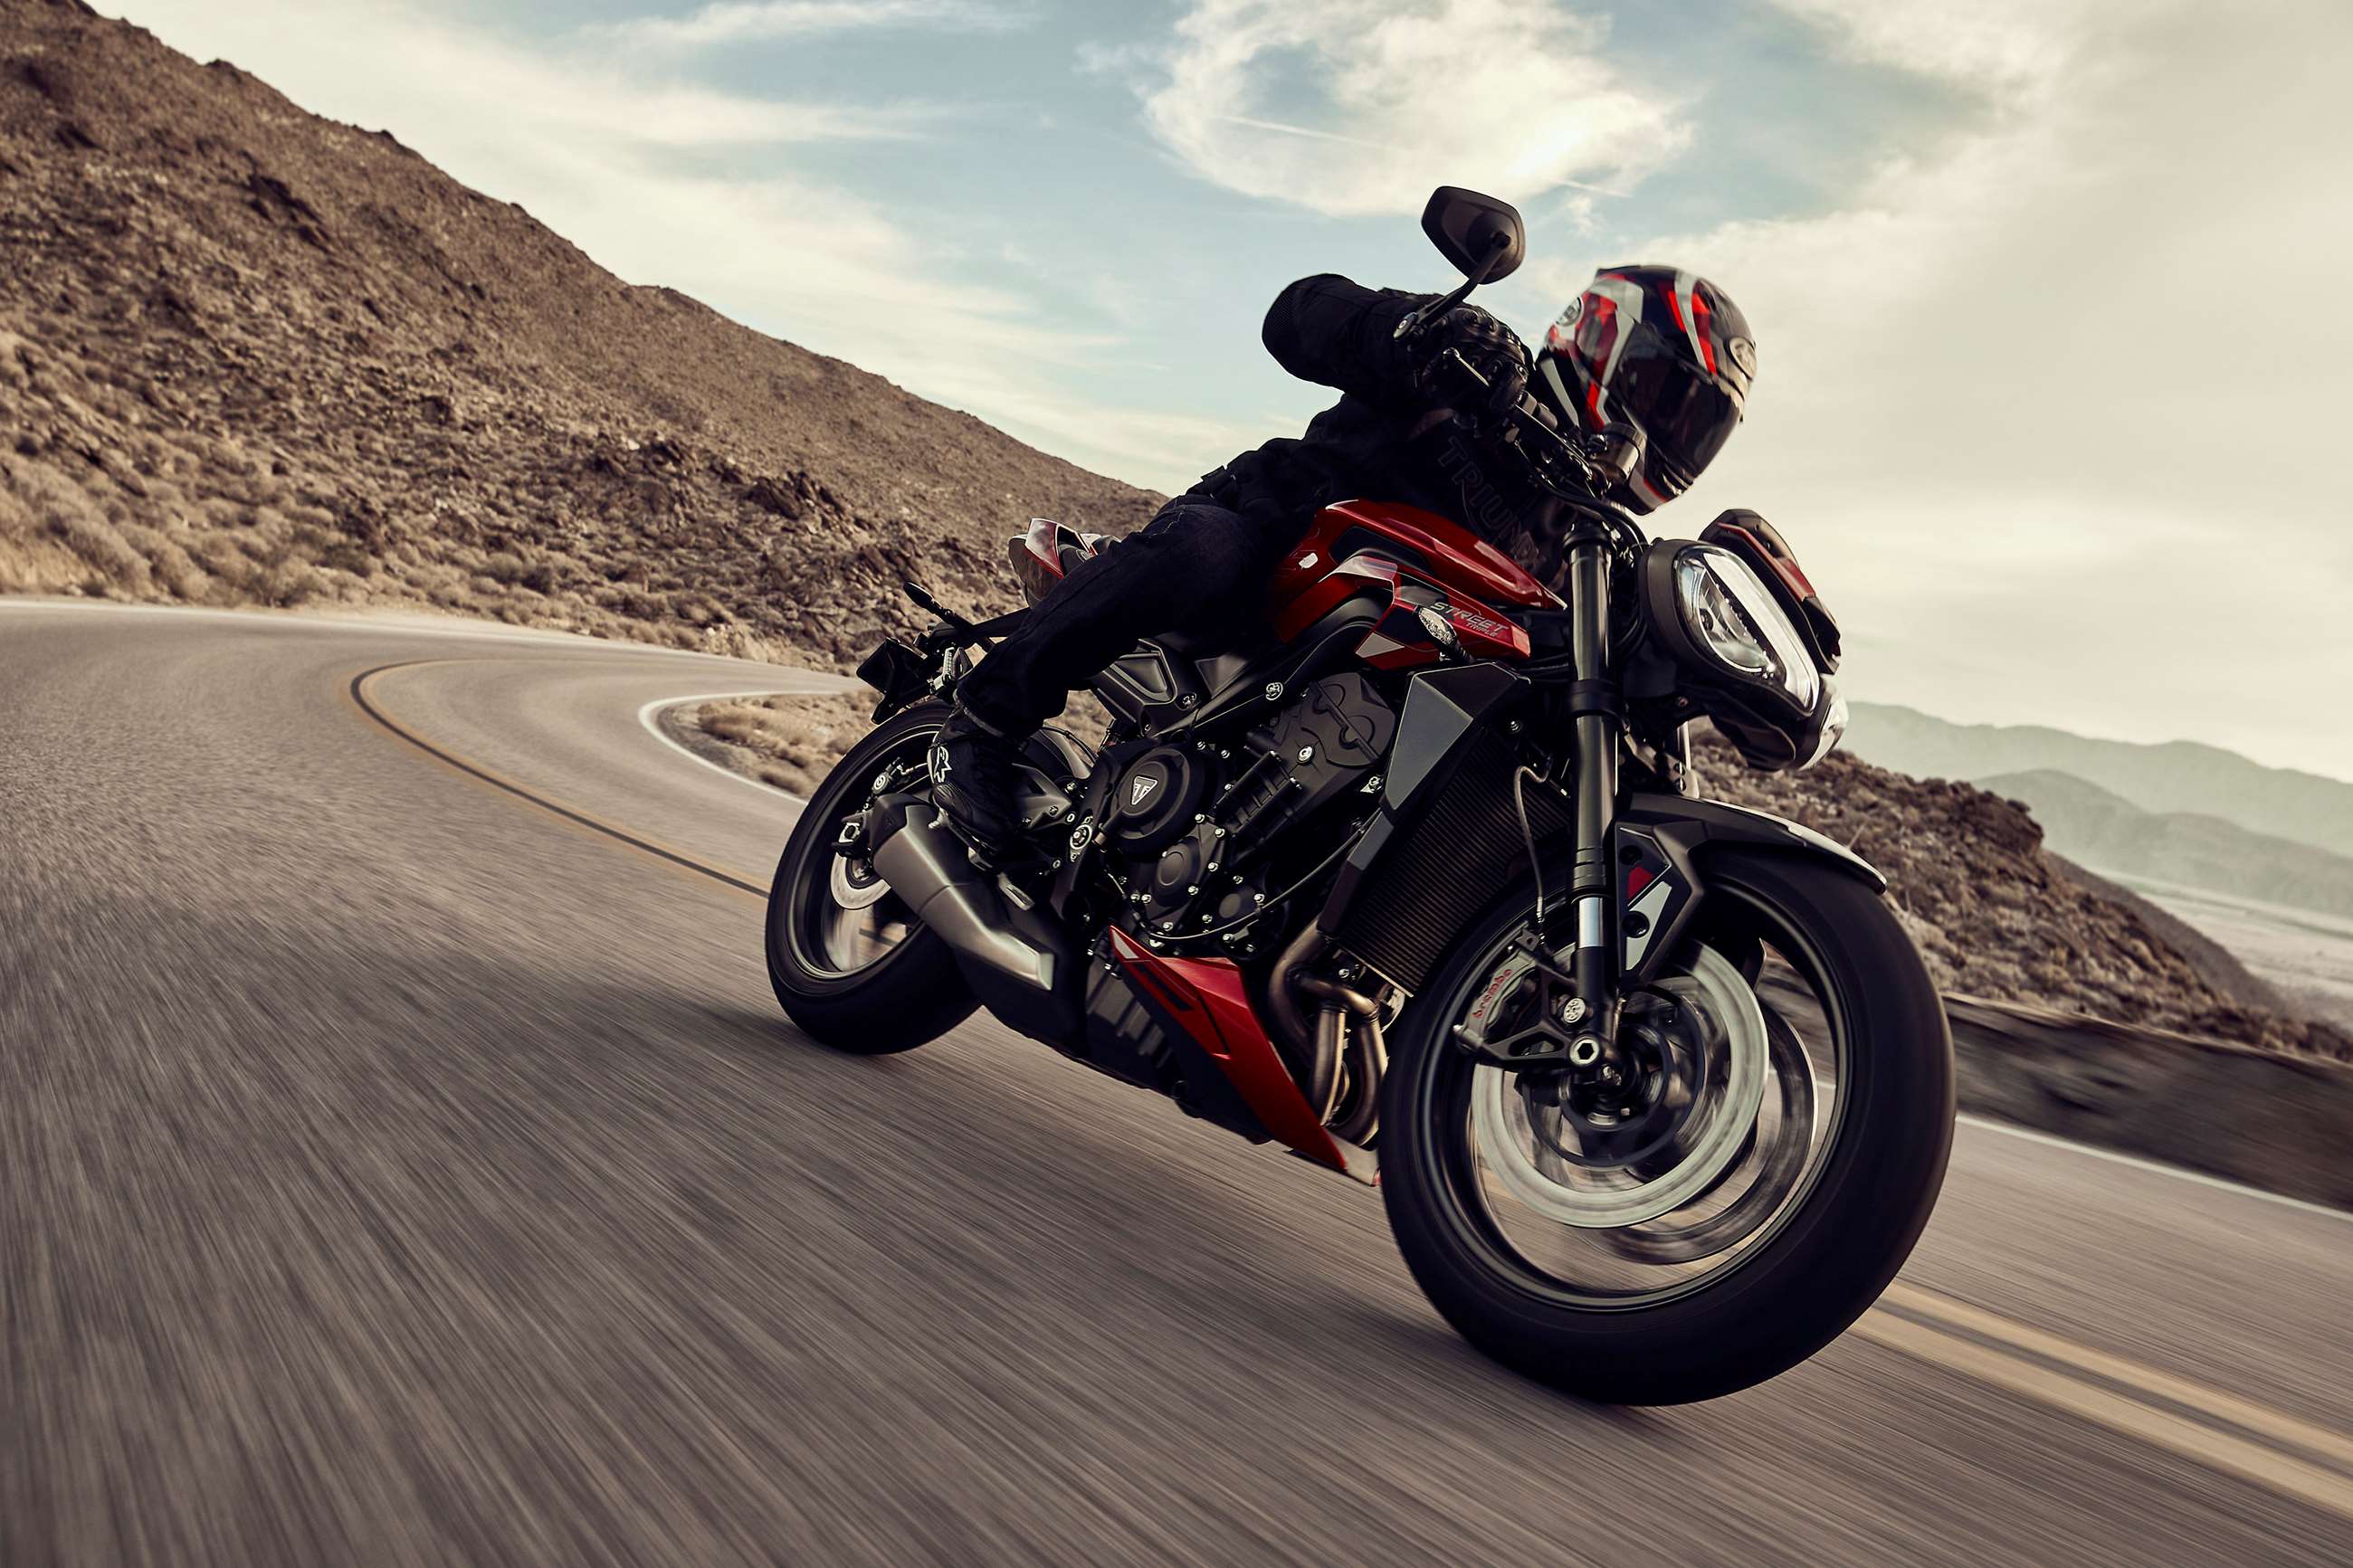 Triumph brings Moto2 to the roads with new Street Triple GRR